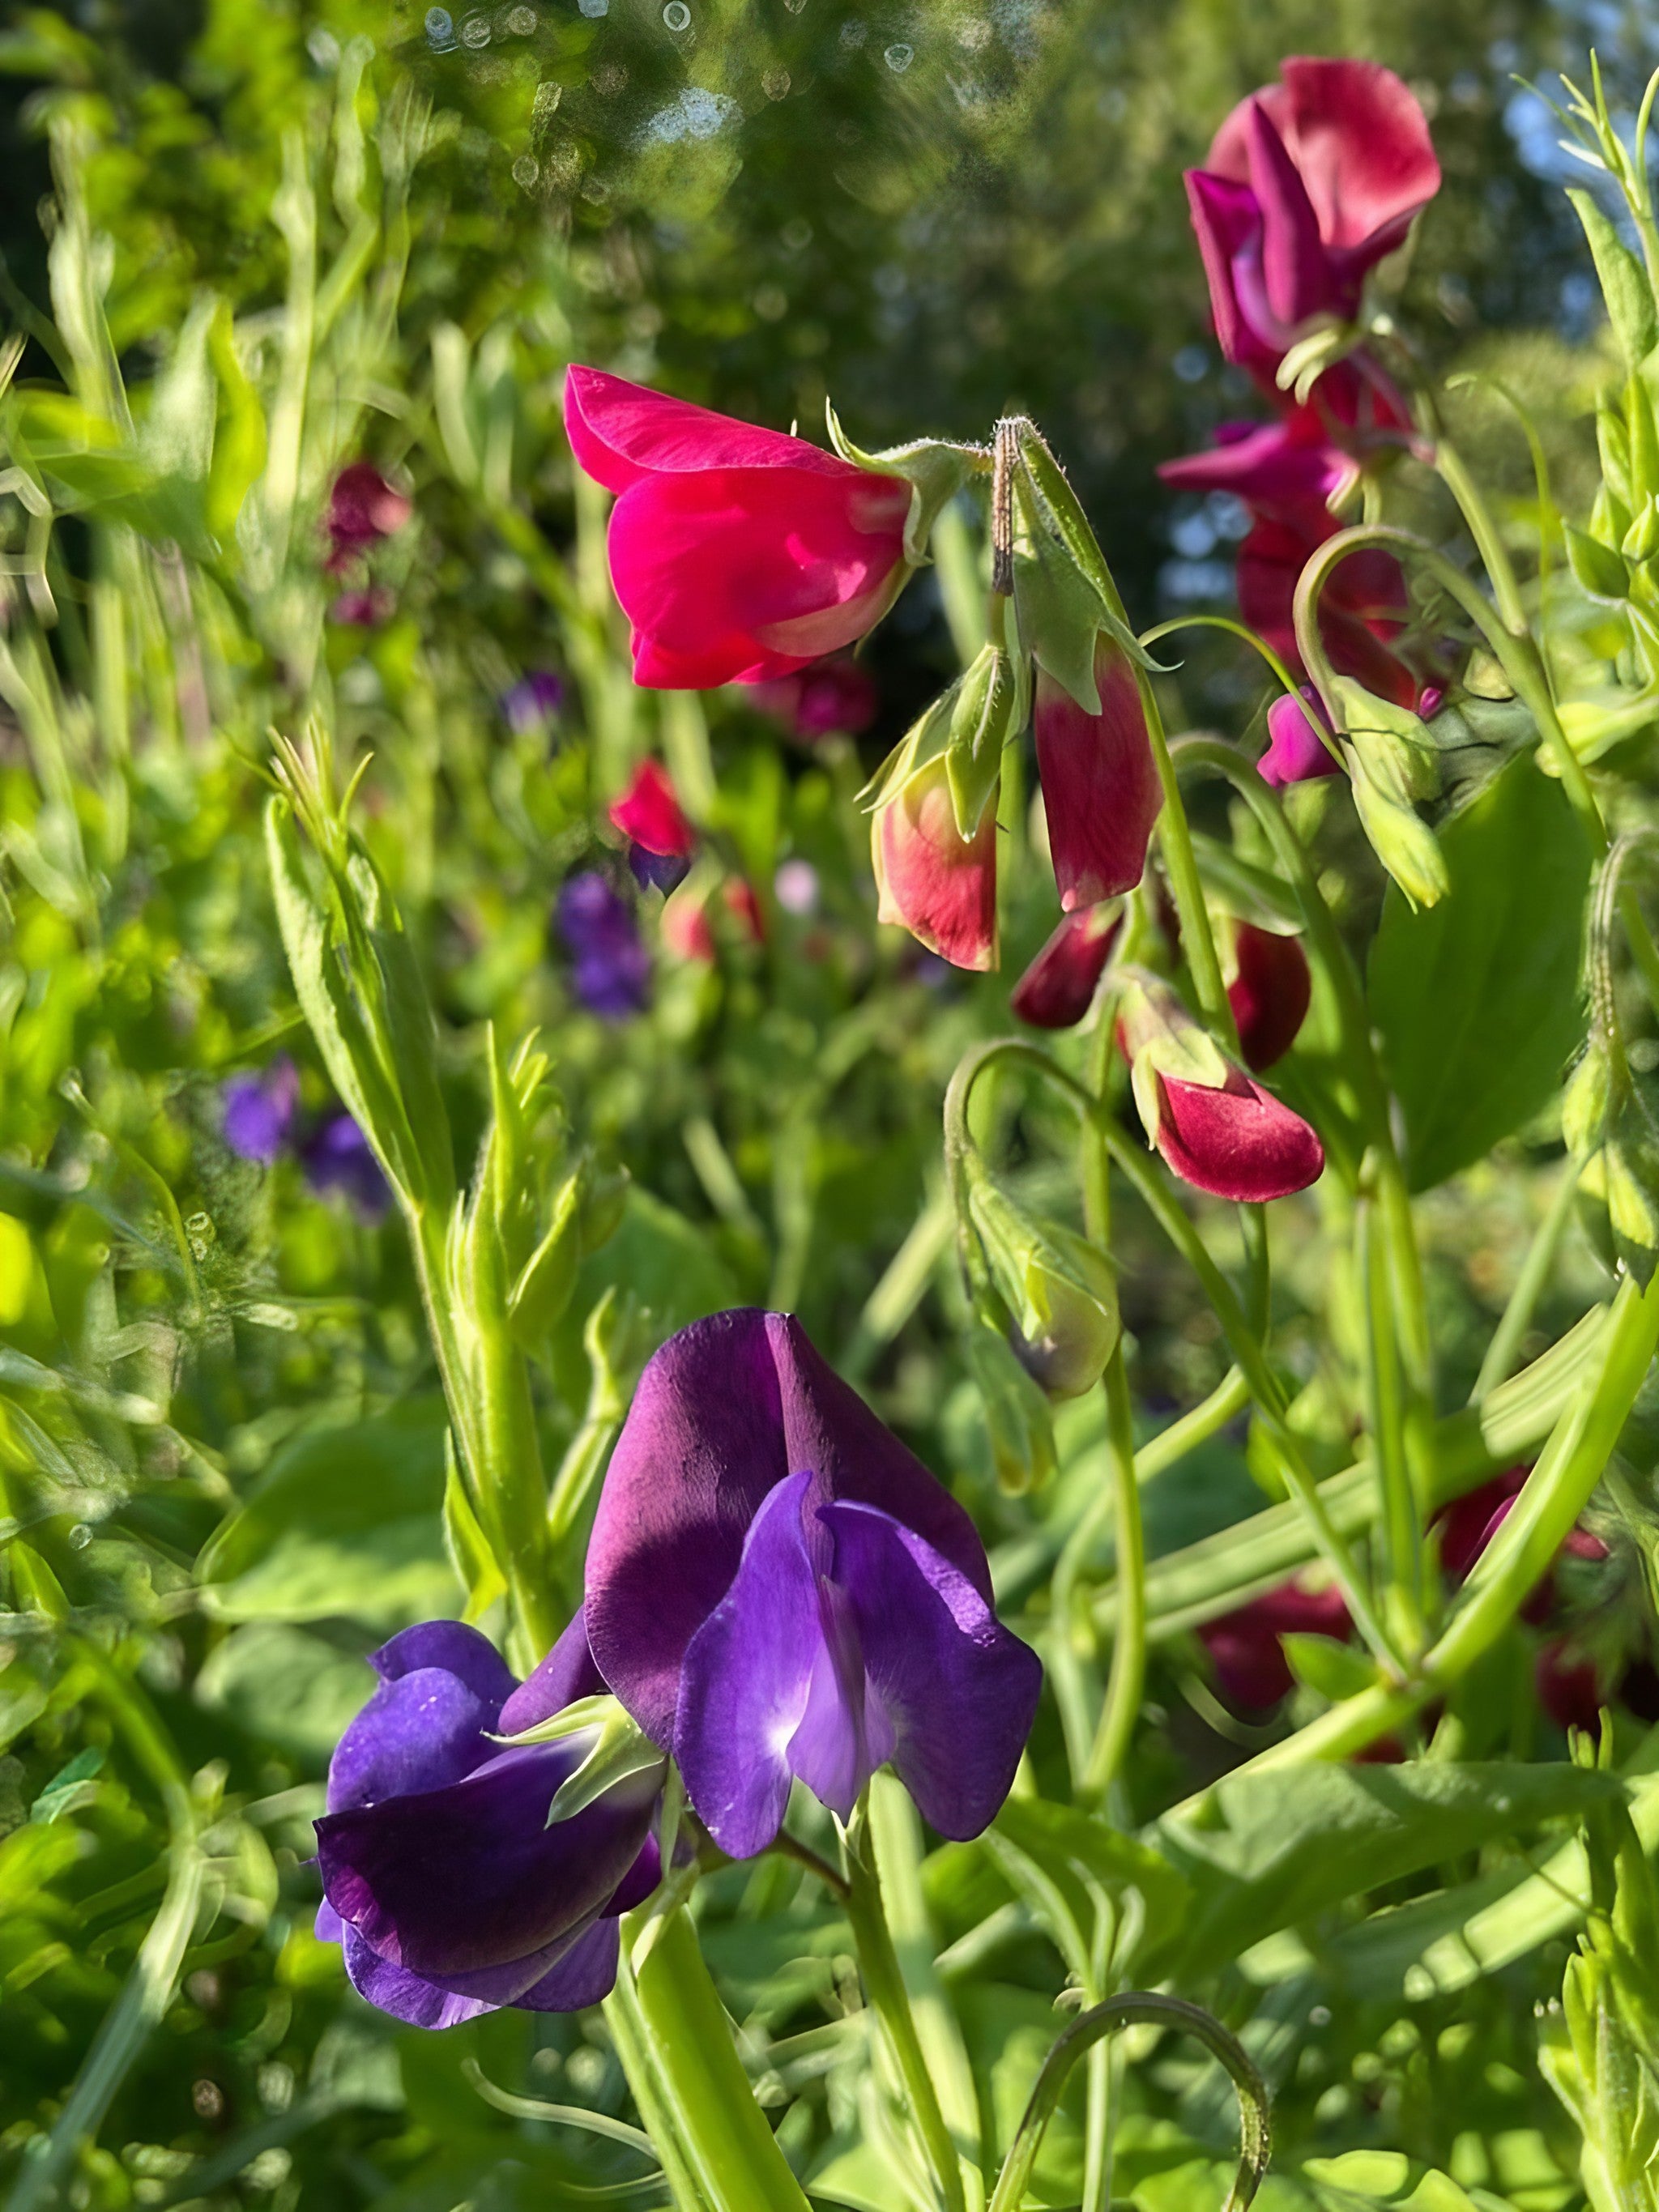 Sweet Pea Old Spice Starry Night blooms with a blurred garden background